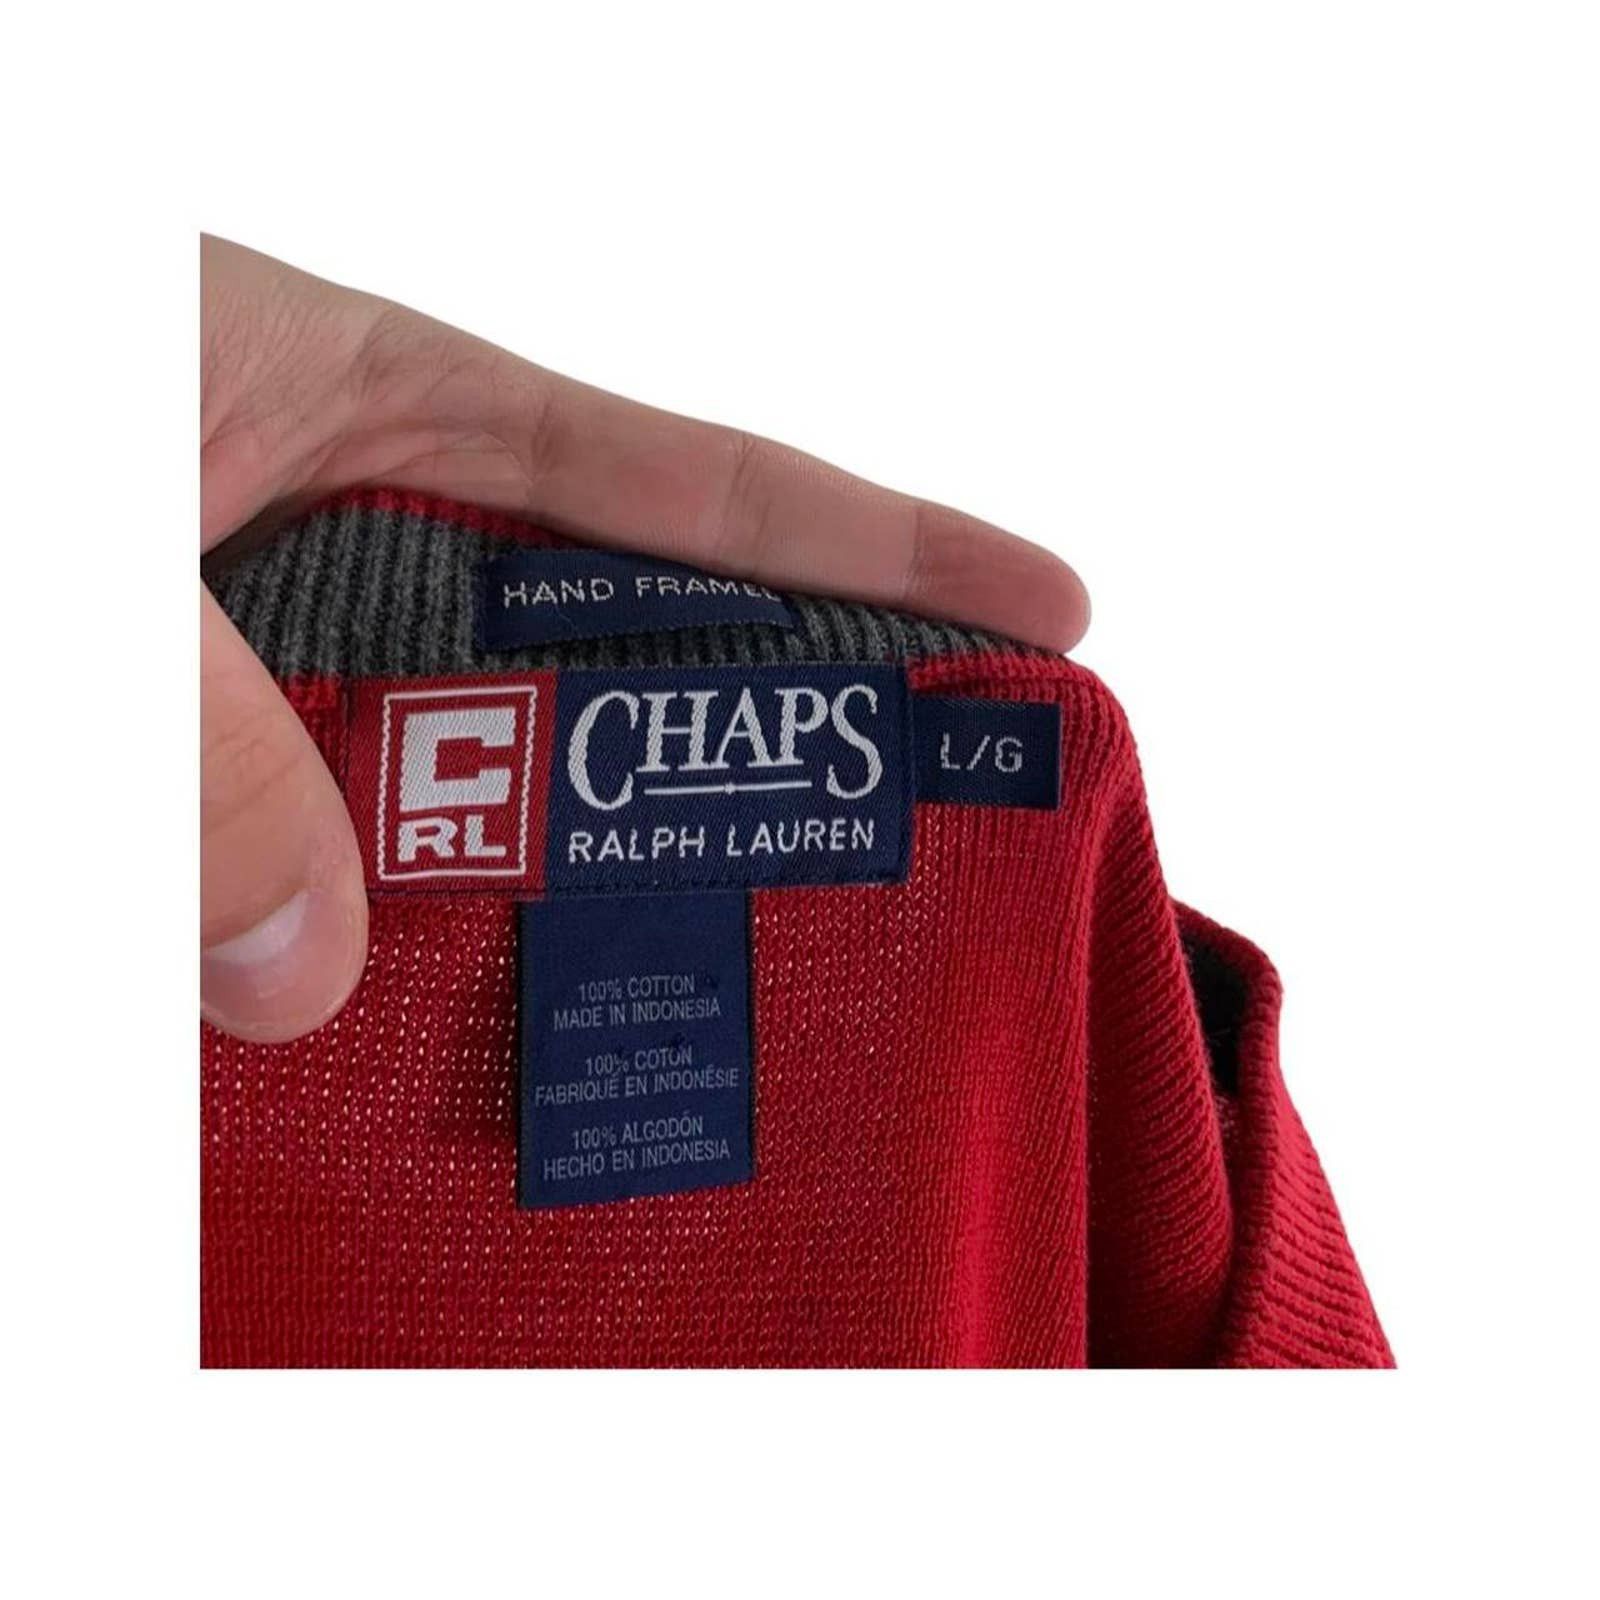 Chaps Vintage 90s Chaps Baggy Red Sweater Size US L / EU 52-54 / 3 - 4 Preview